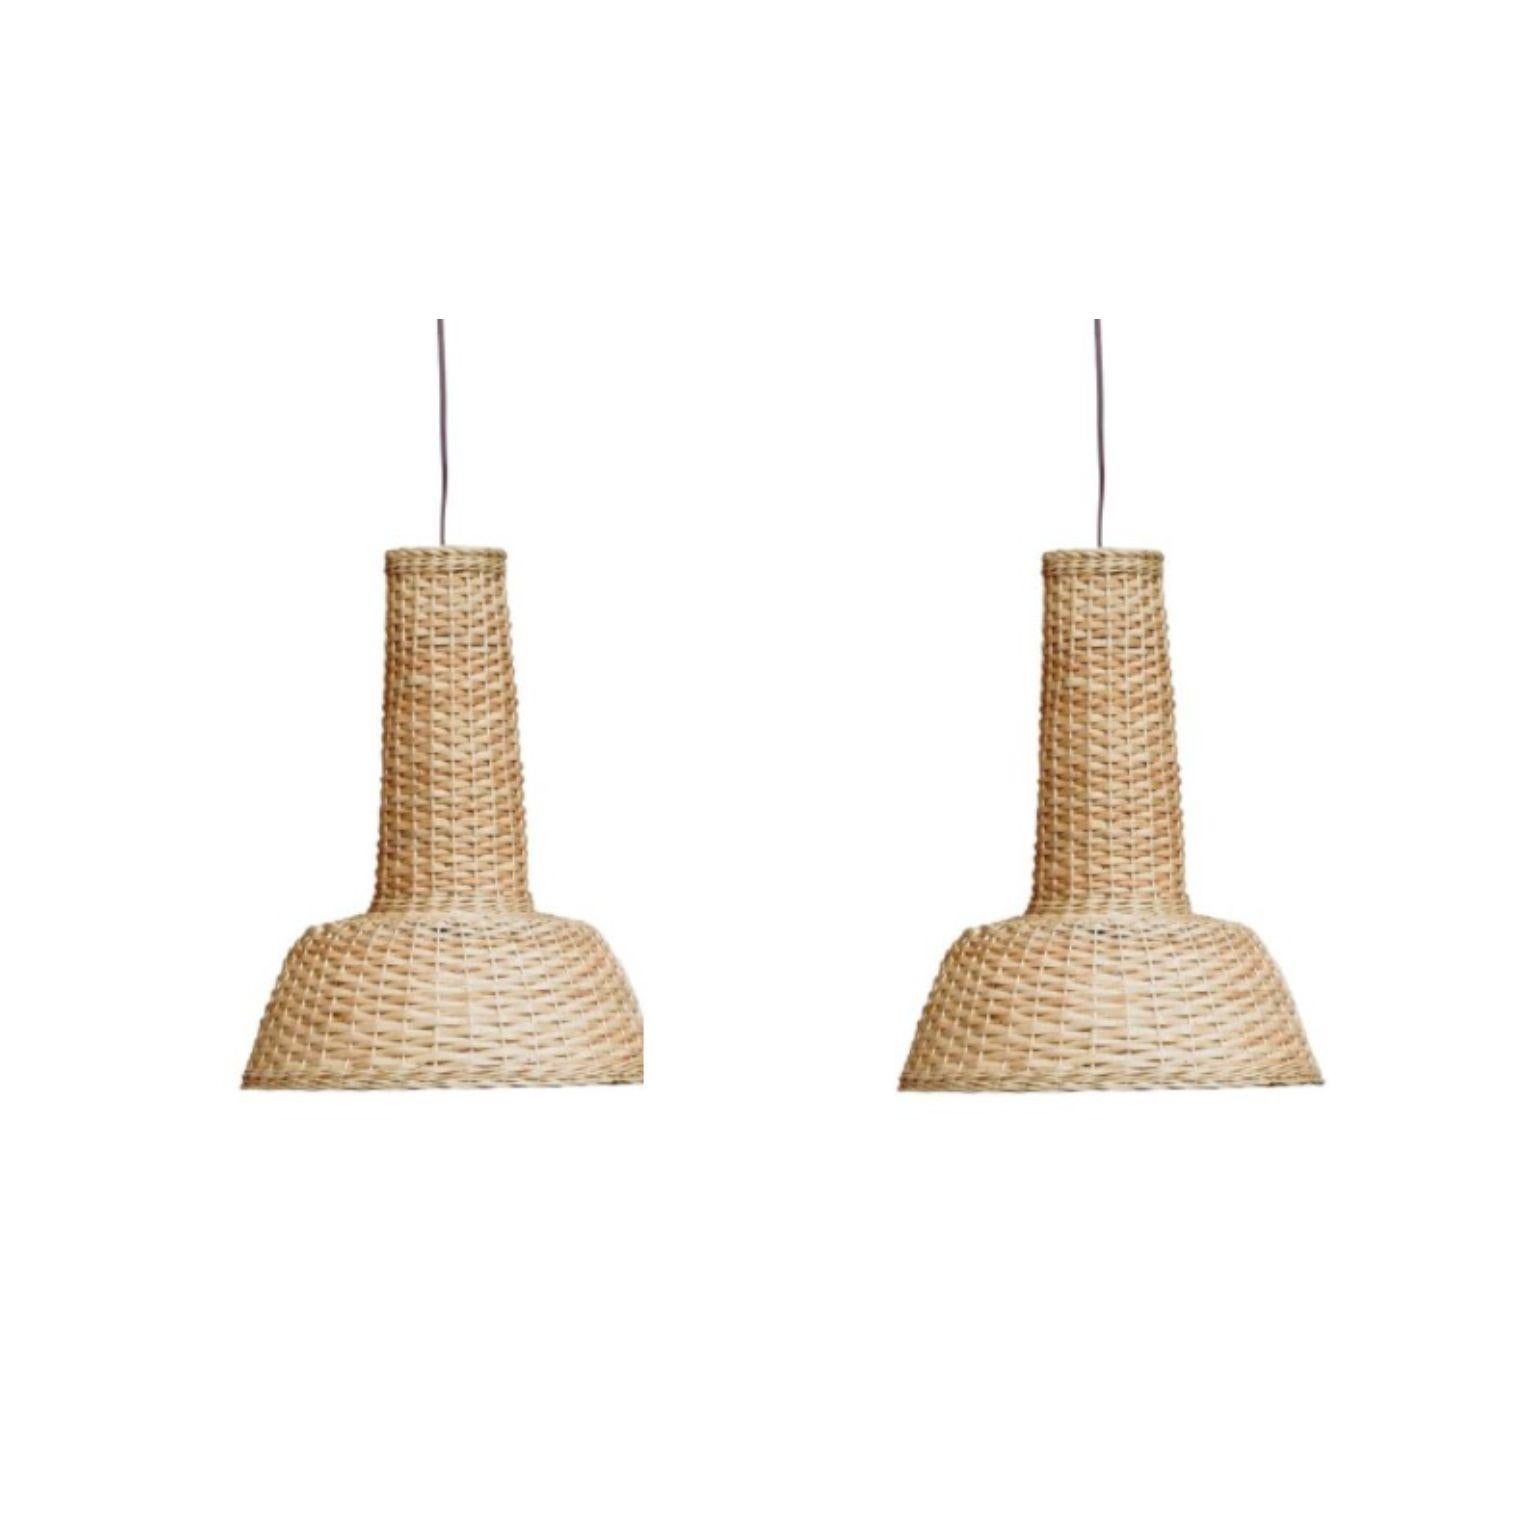 Set of 2 pendant lamps by Faina
Design: Victoriya Yakusha
Materials: Willow vine, steel frame
Dimensions: D 37 x H 44 cm


The light of lamps is leaking through the patterns of the willow vine, pouring the heat of the Ukrainian village to the